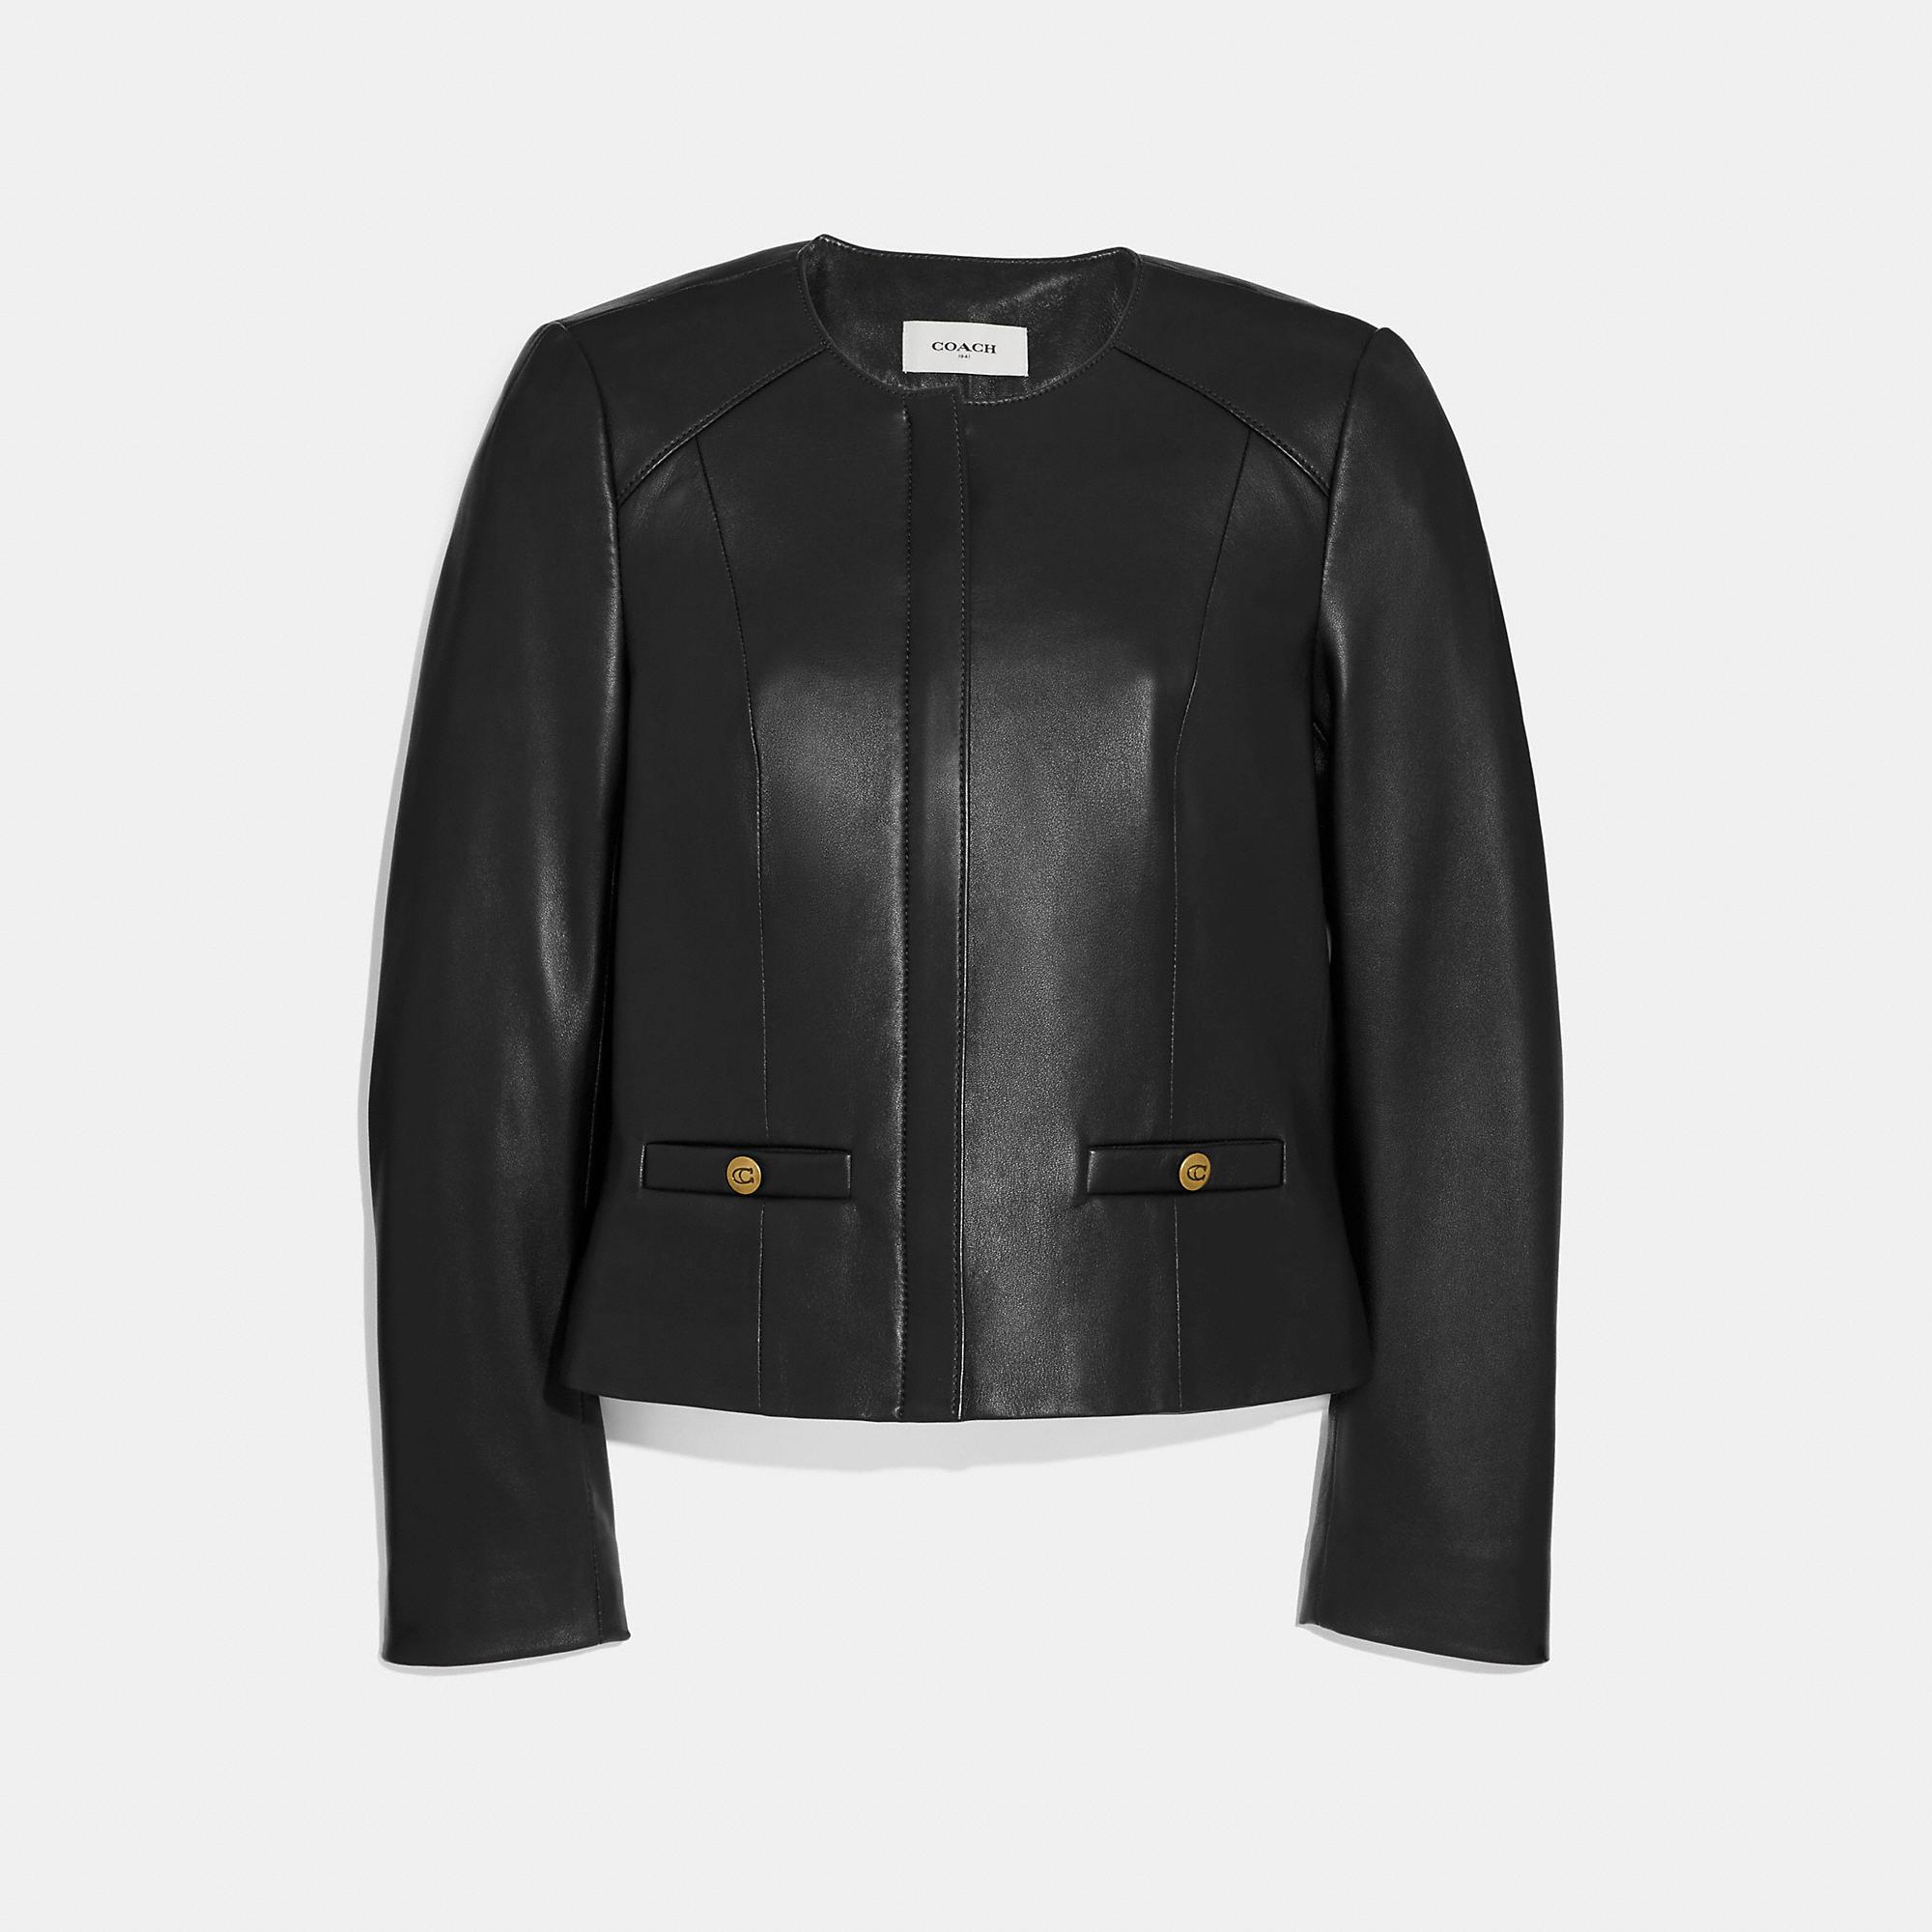 COACH Tailored Leather Jacket in Black - Lyst